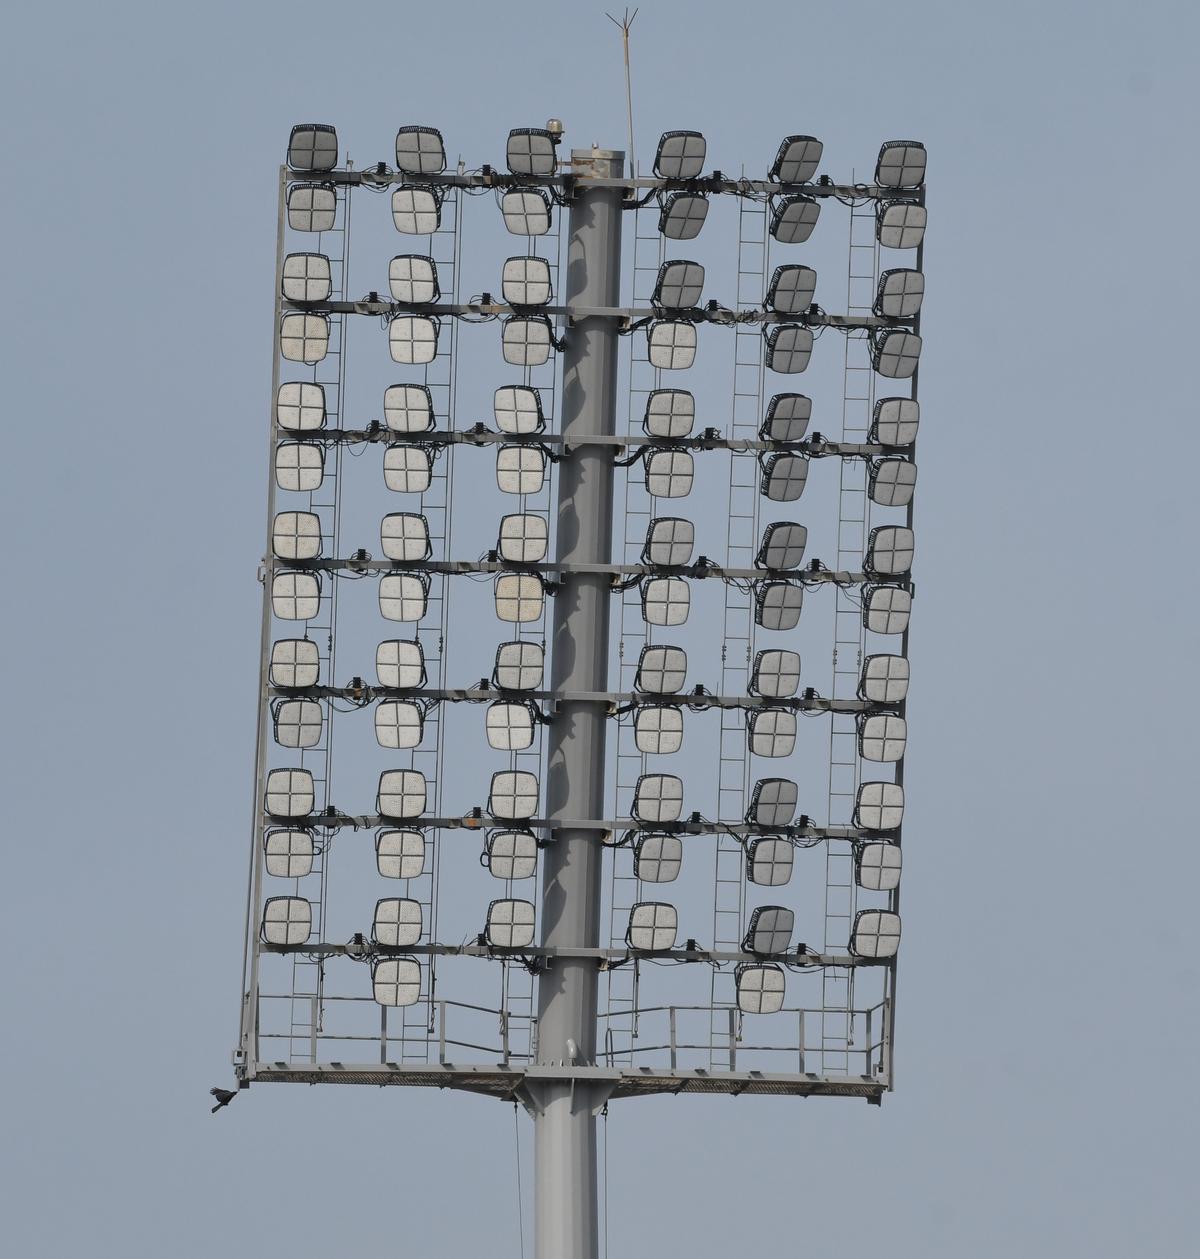 New LED lights have been installed in the four floodlight towers at the M A Chidambaram Stadium in Chennai ahead of the ICC Men’s ODI World Cup.